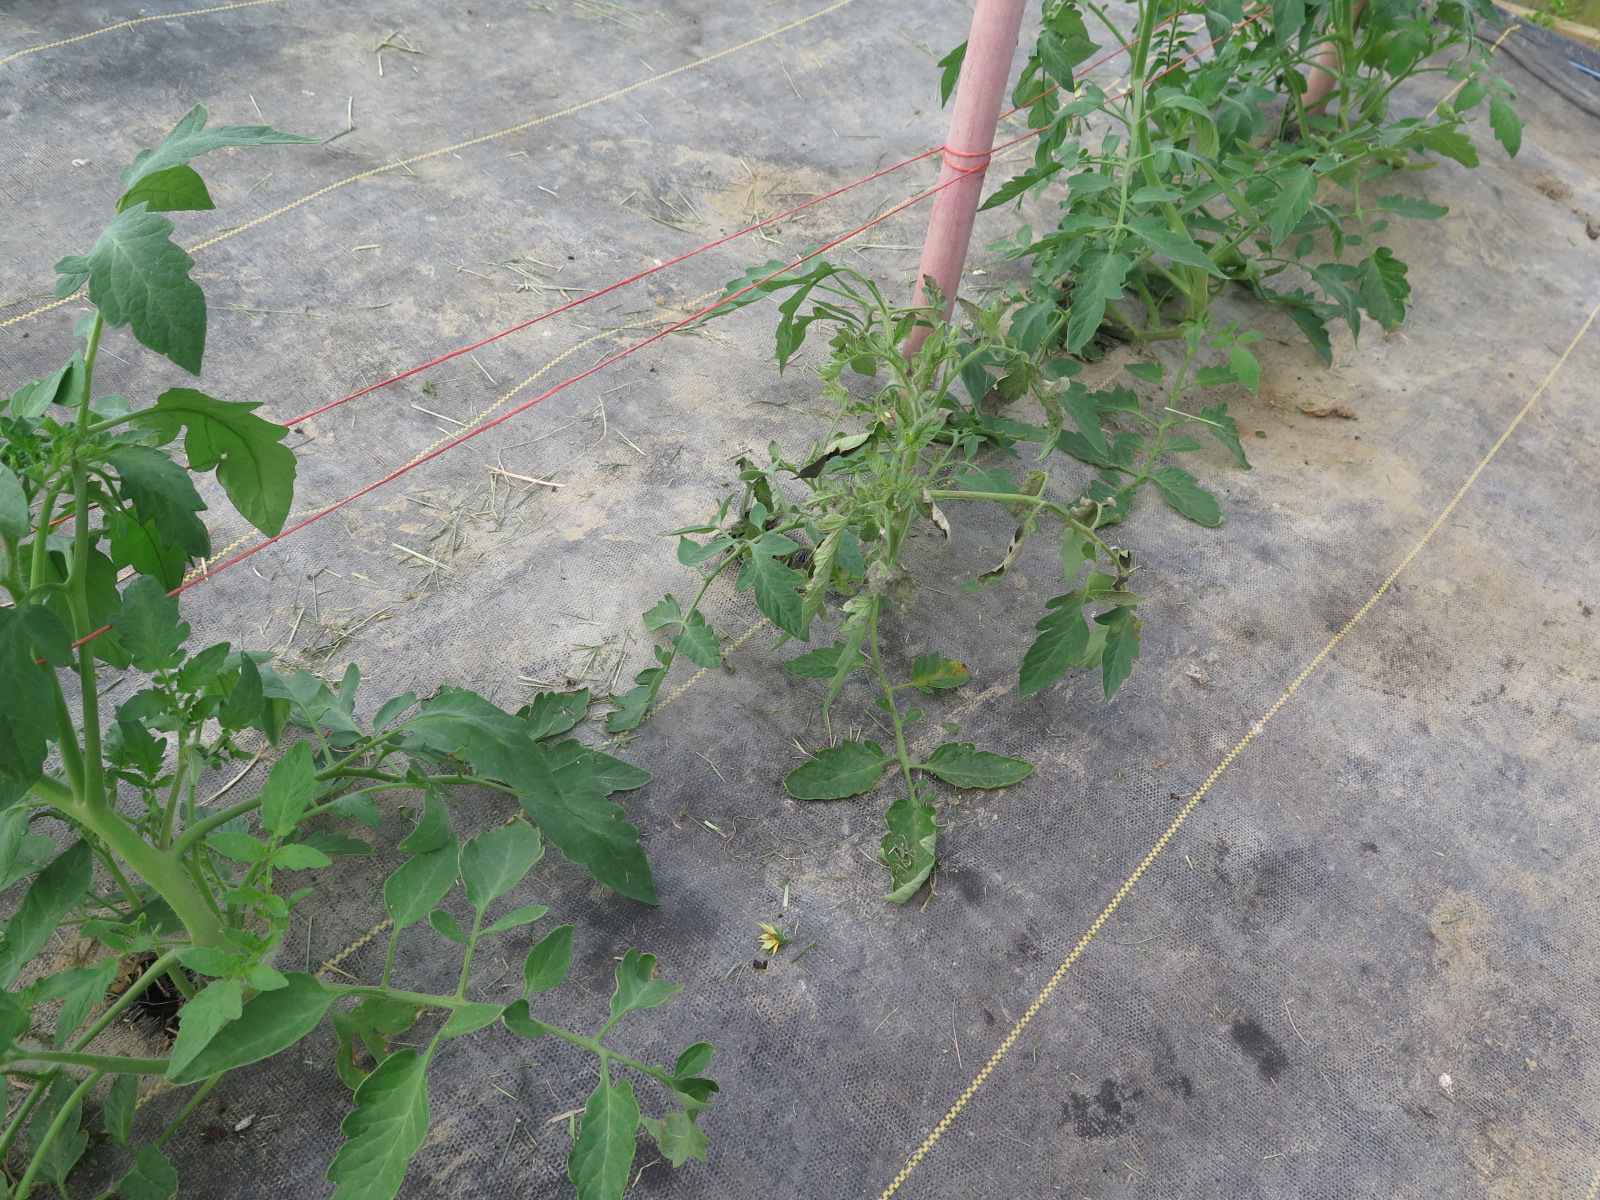 Tomato in center of photo is wilting due to tomato spotted wilt virus.